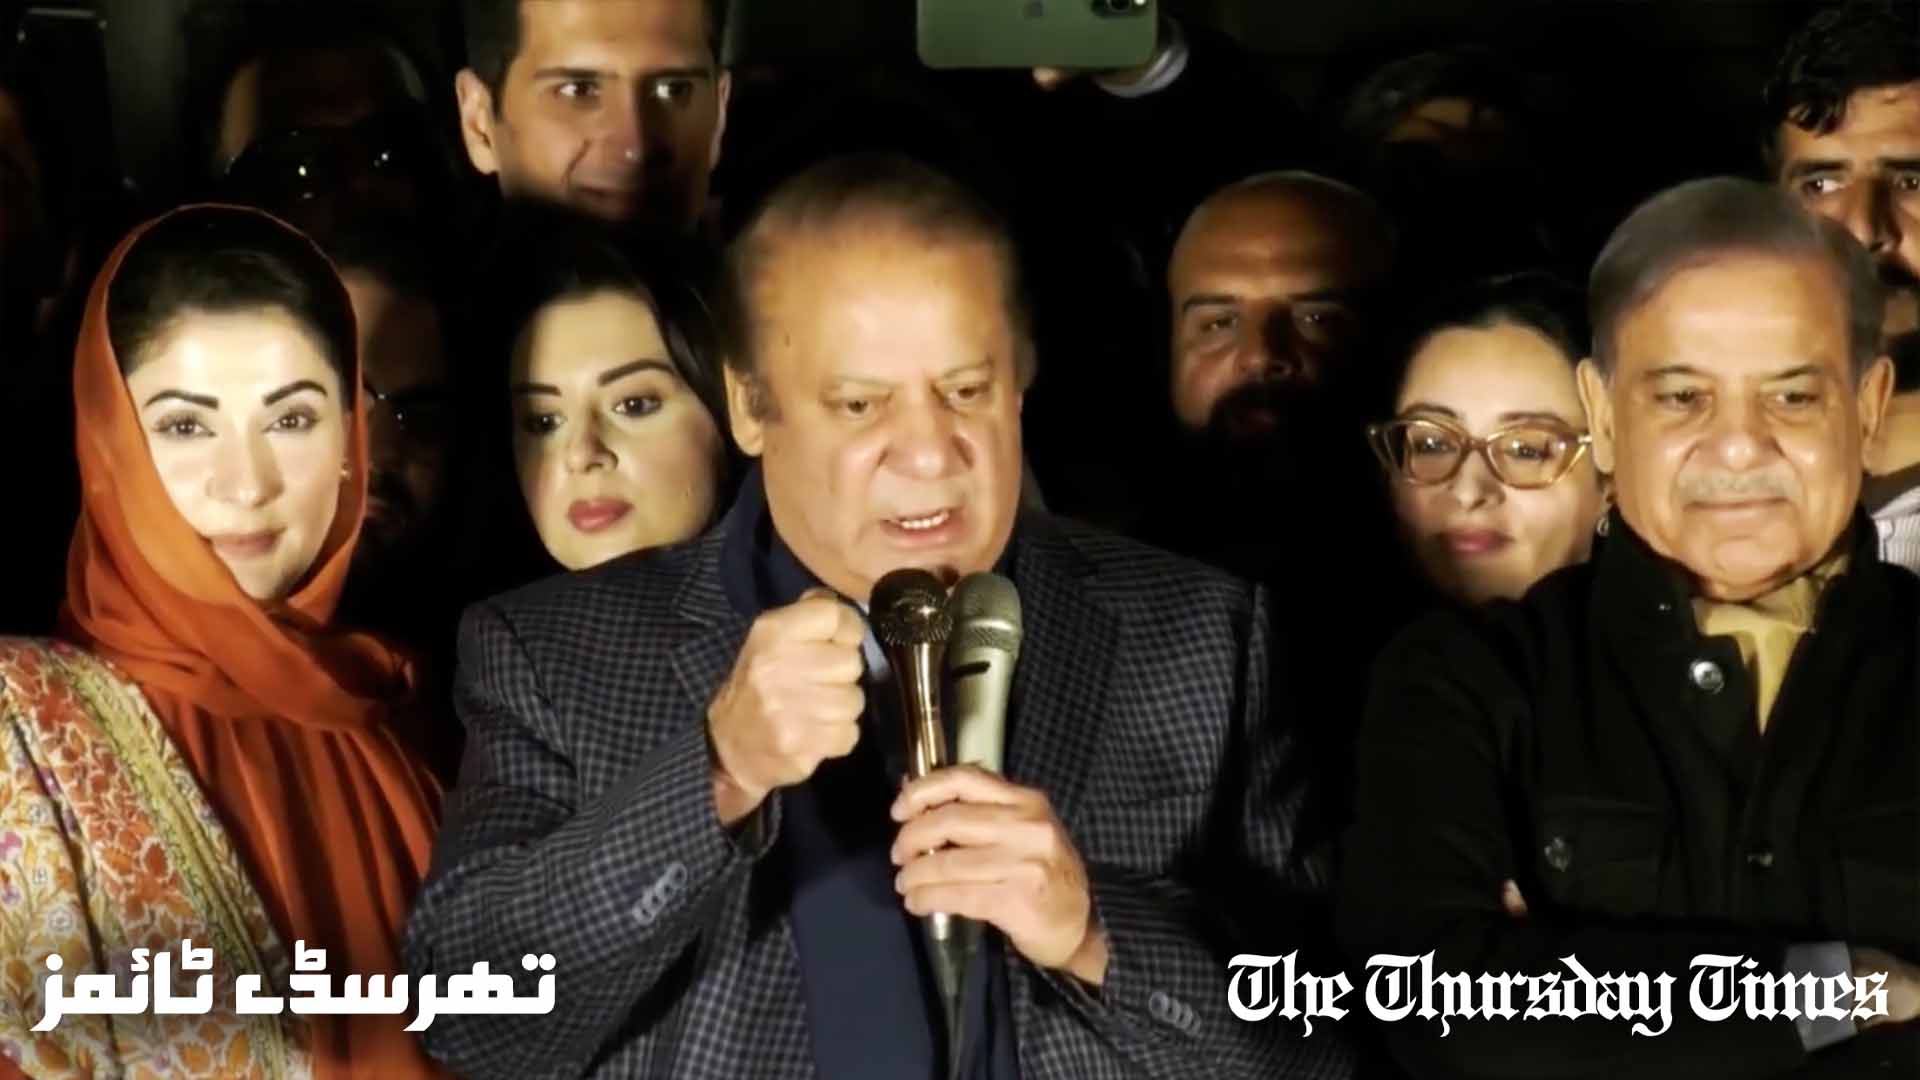 A file photo is shown of PML(N) supremo Nawaz Sharif (C), PML(N) senior vice president Maryam Nawaz (L), and PML(N) president Shehbaz Sharif (R) addressing a crowd of supporters at Lahore's Model Town district on February 9, 2024. — FILE/THE THURSDAY TIMES